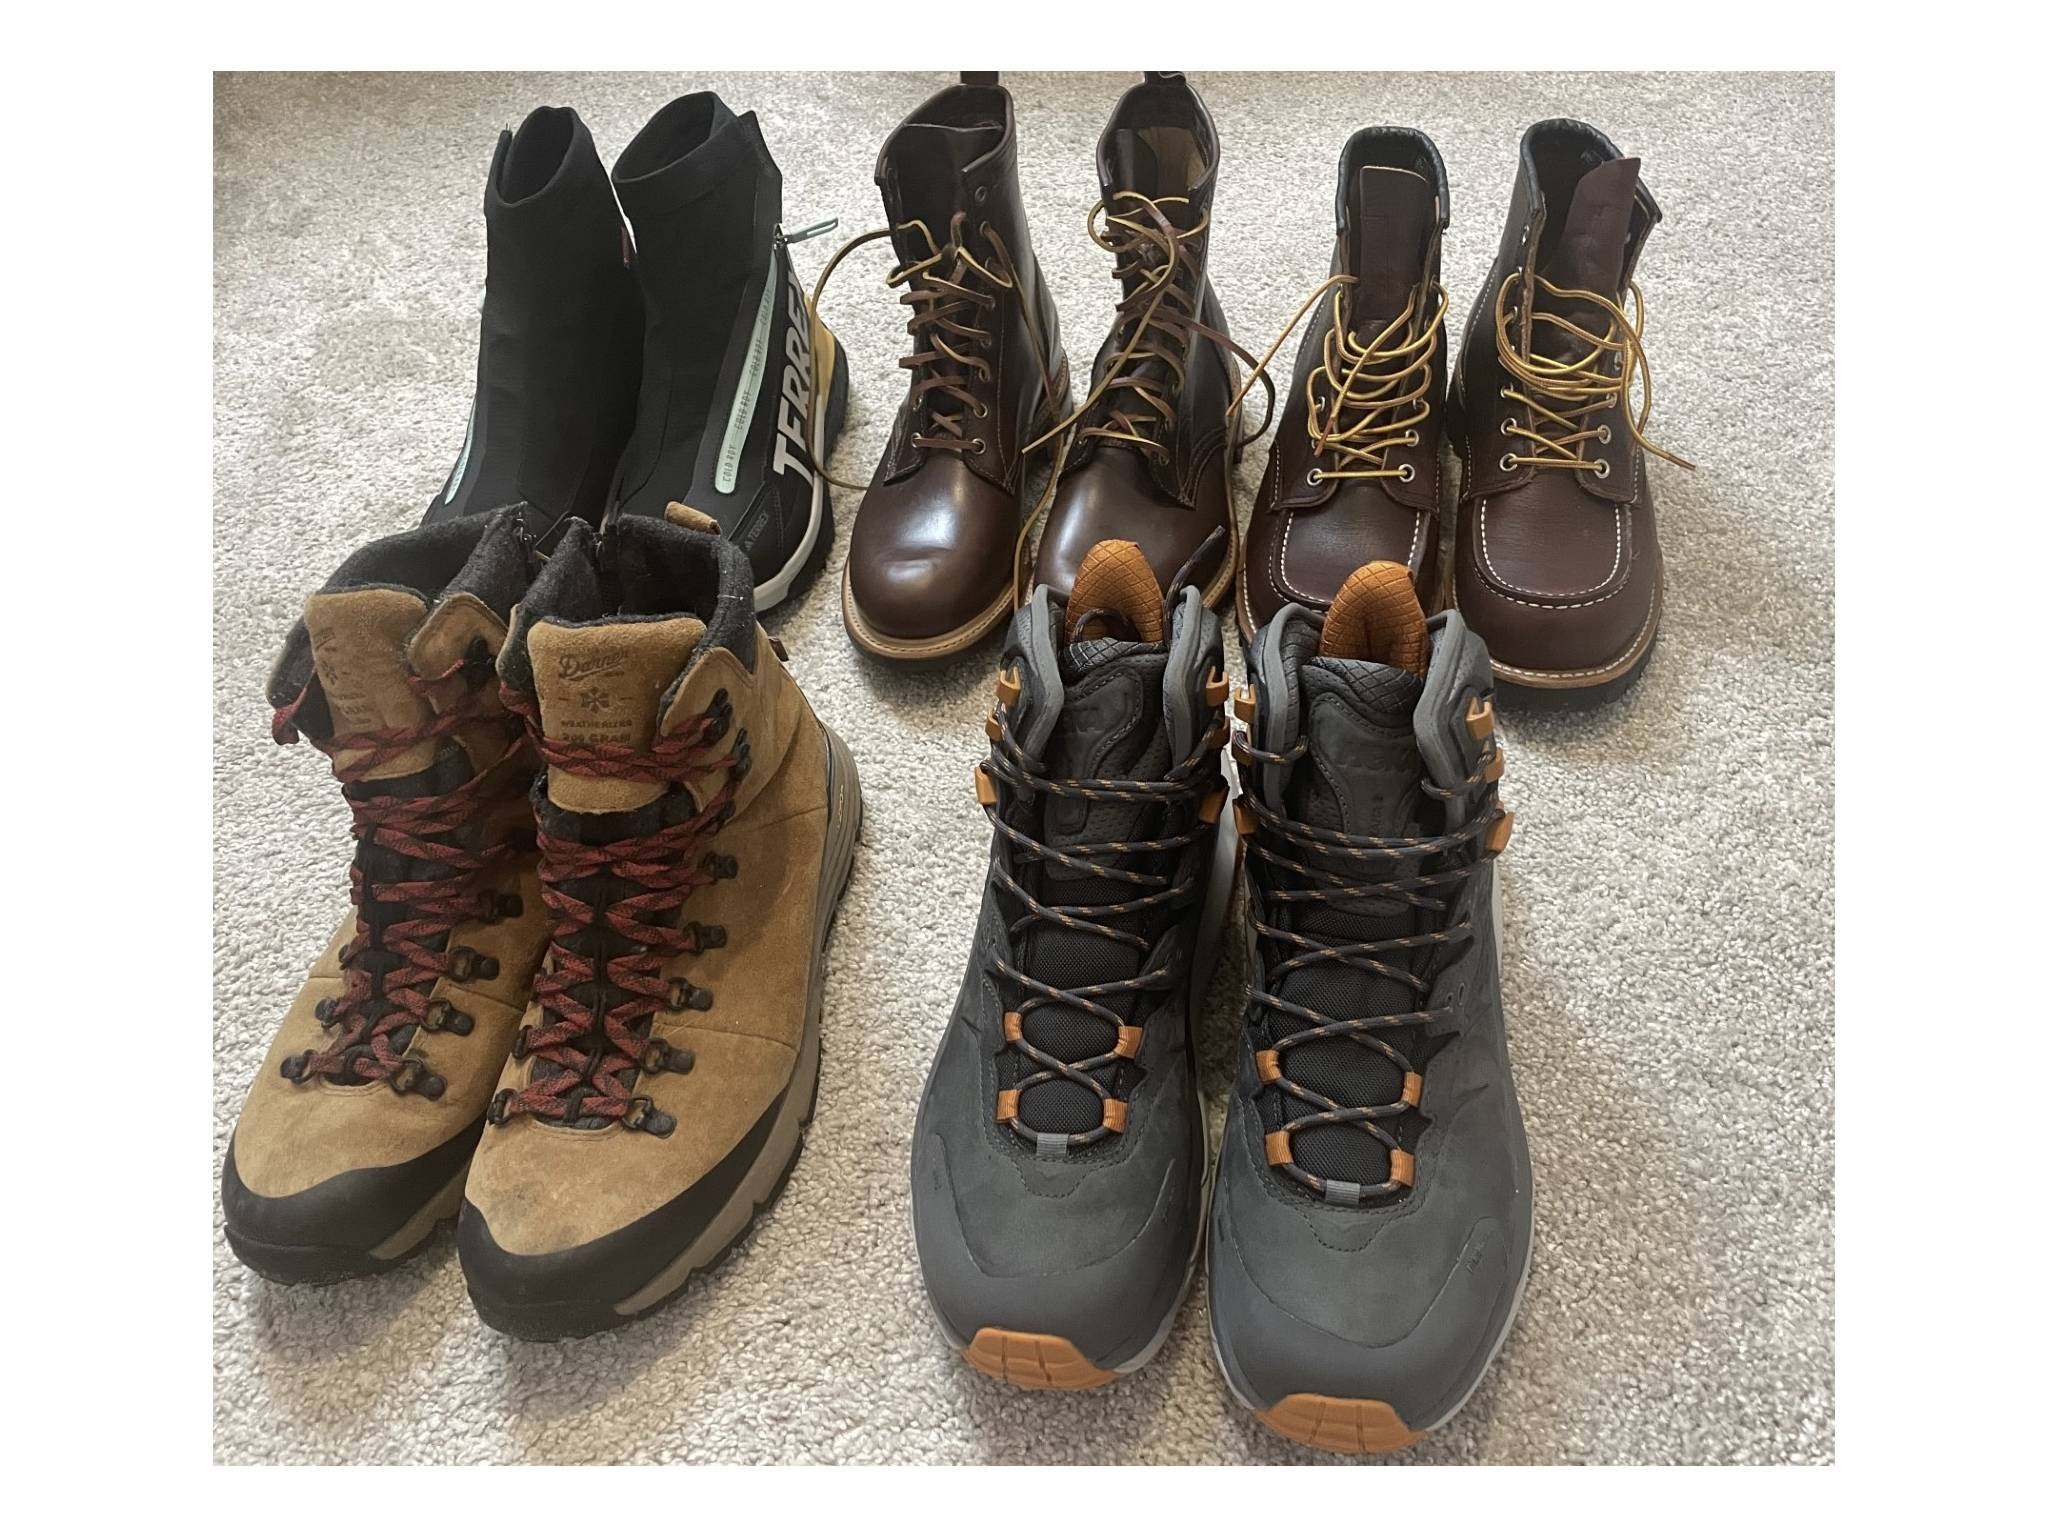 A selection of the best men’s snow boots that we tested for this review